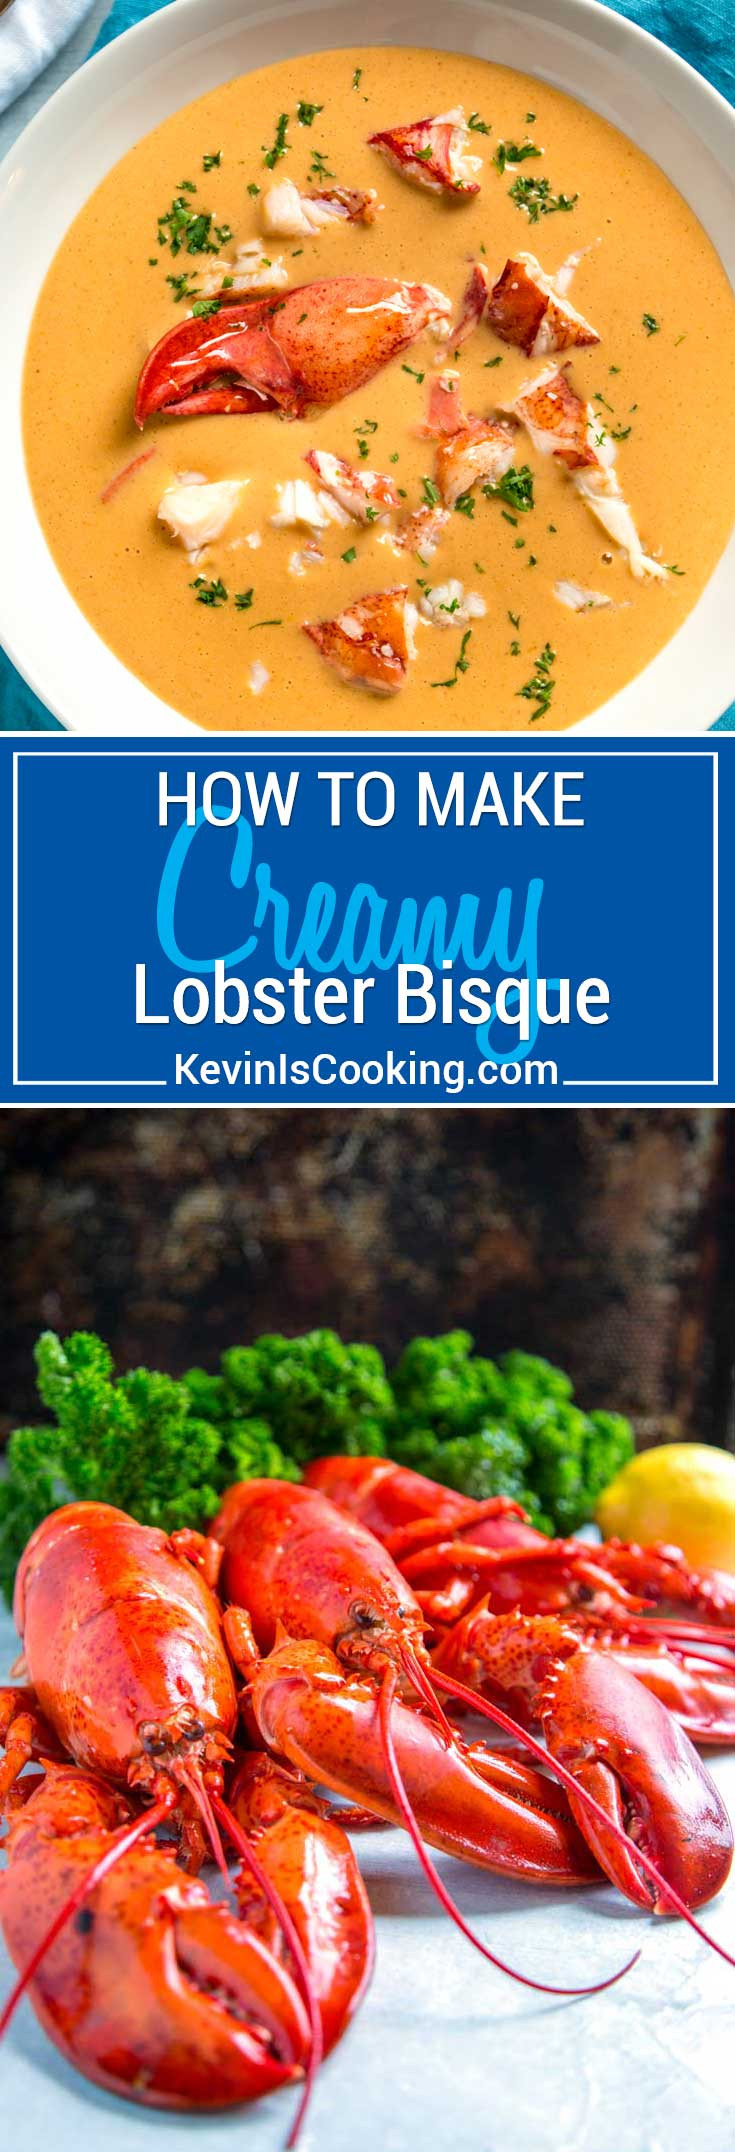 Lobster Bisque Soup Recipe
 Creamy Lobster Bisque Recipe Kevin Is Cooking